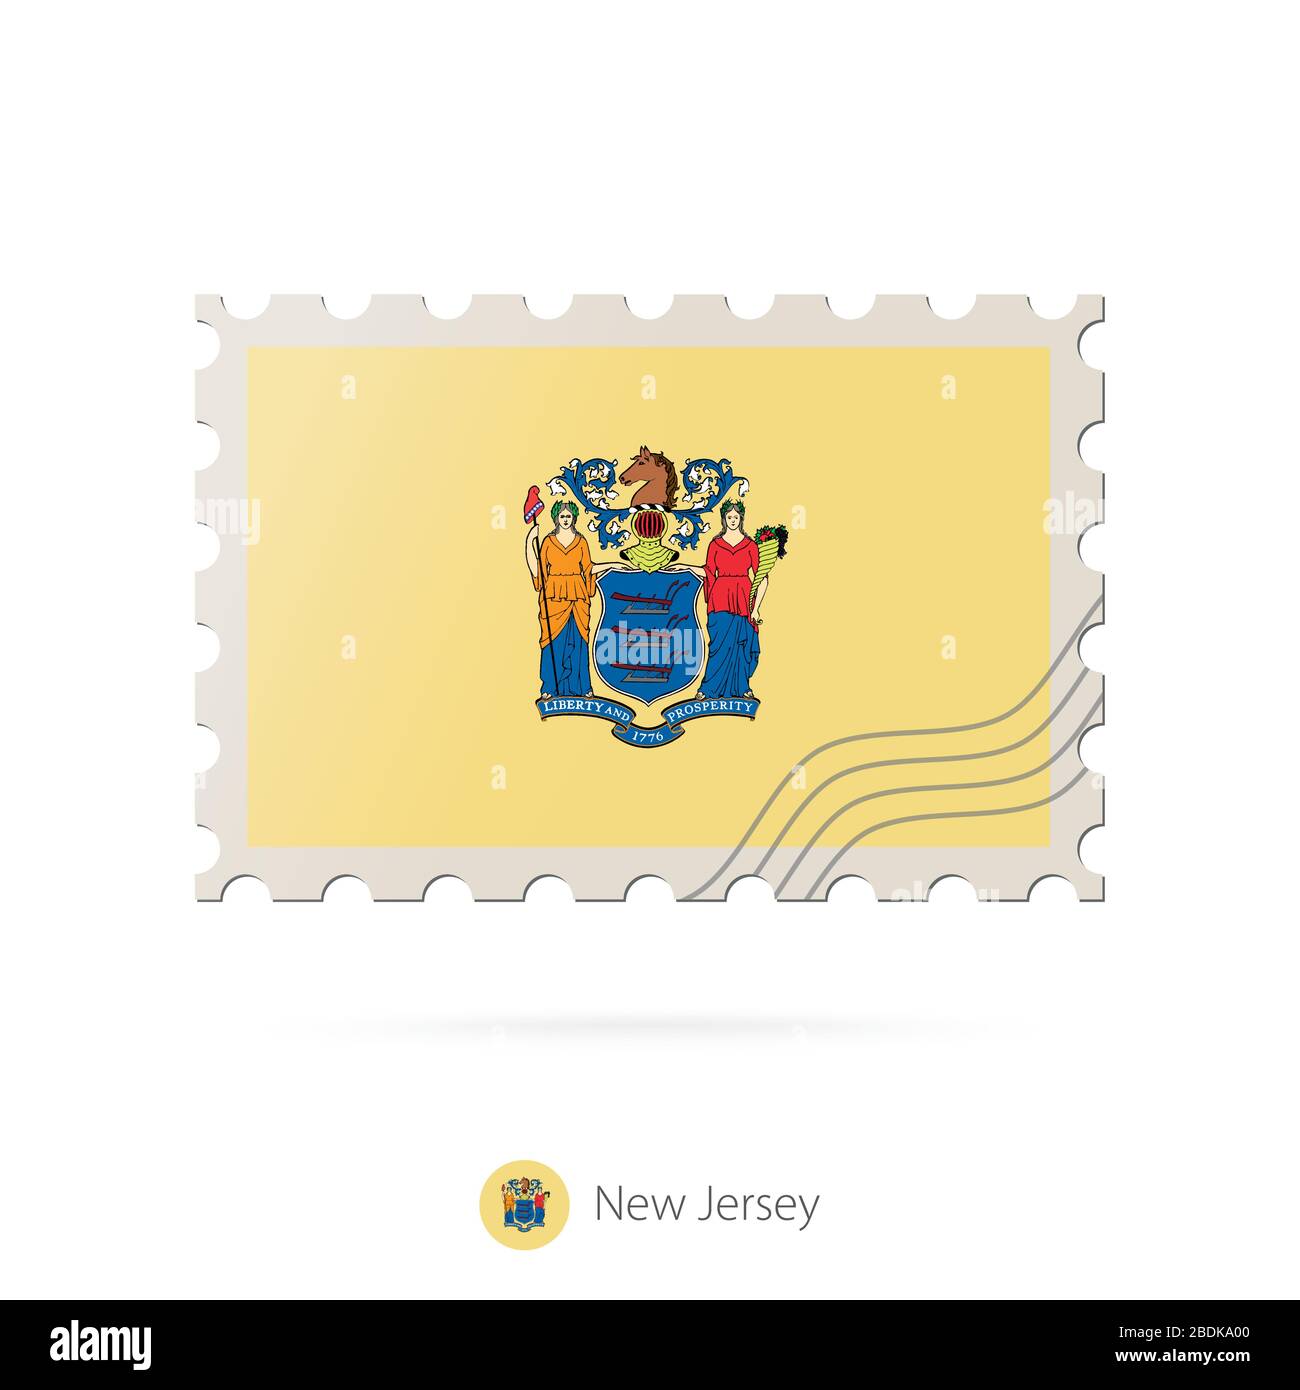 Postage stamp with the image of New Jersey state flag. New Jersey Flag Postage on white background with shadow. Vector Illustration. Stock Vector